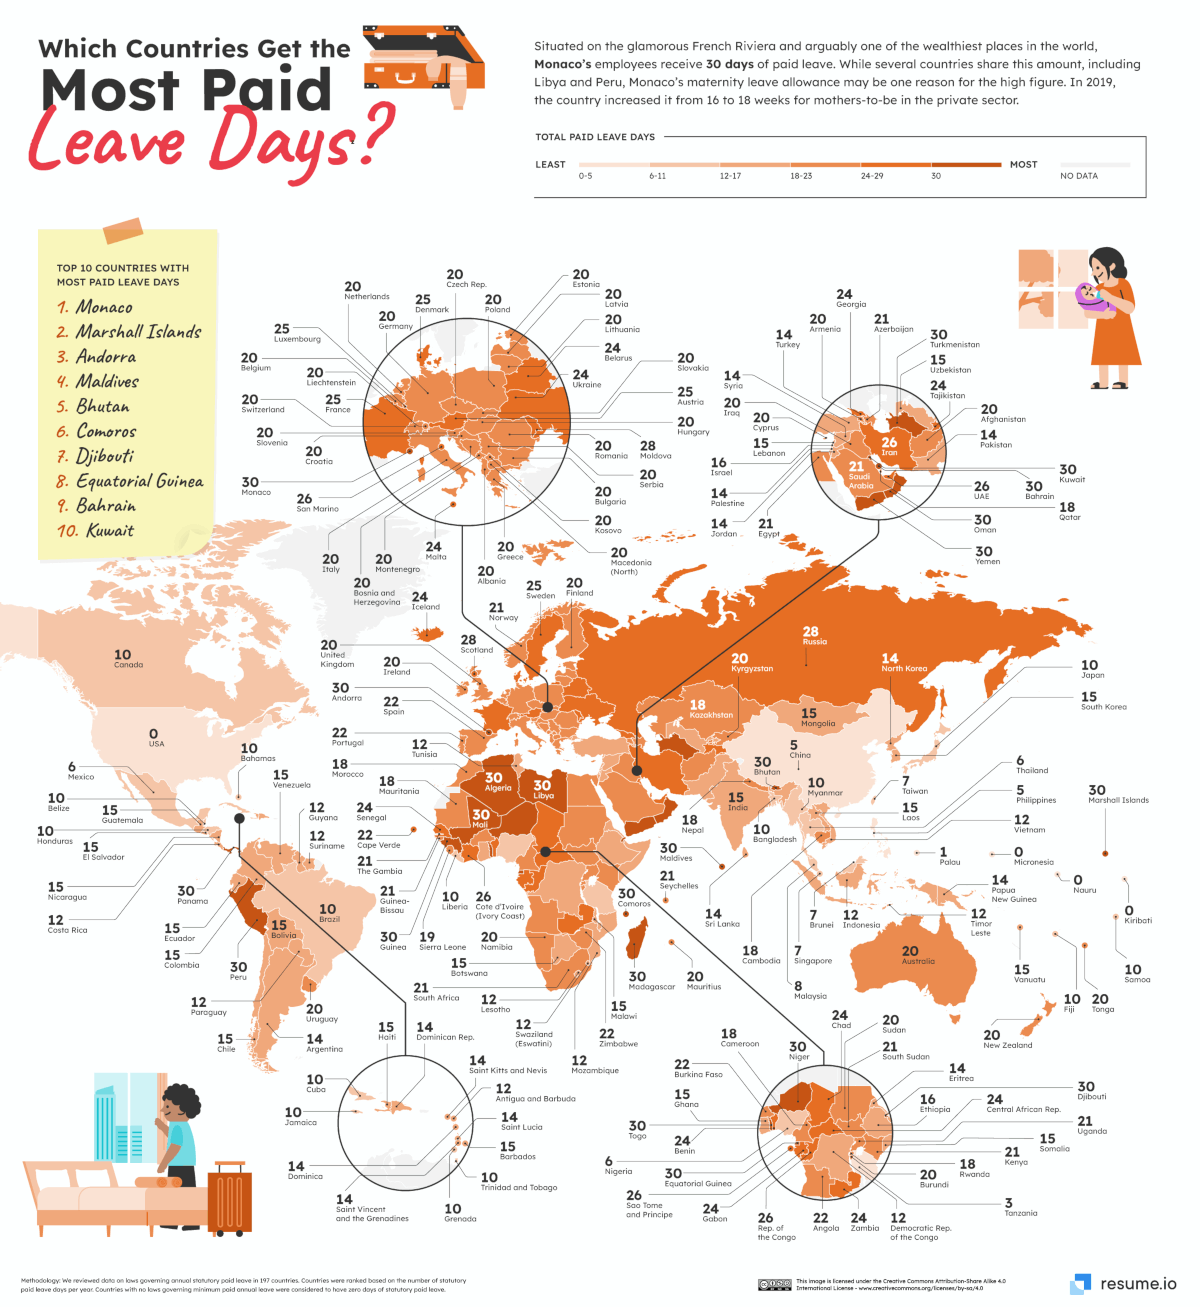 Resume.io visual on countries with the most paid leave days